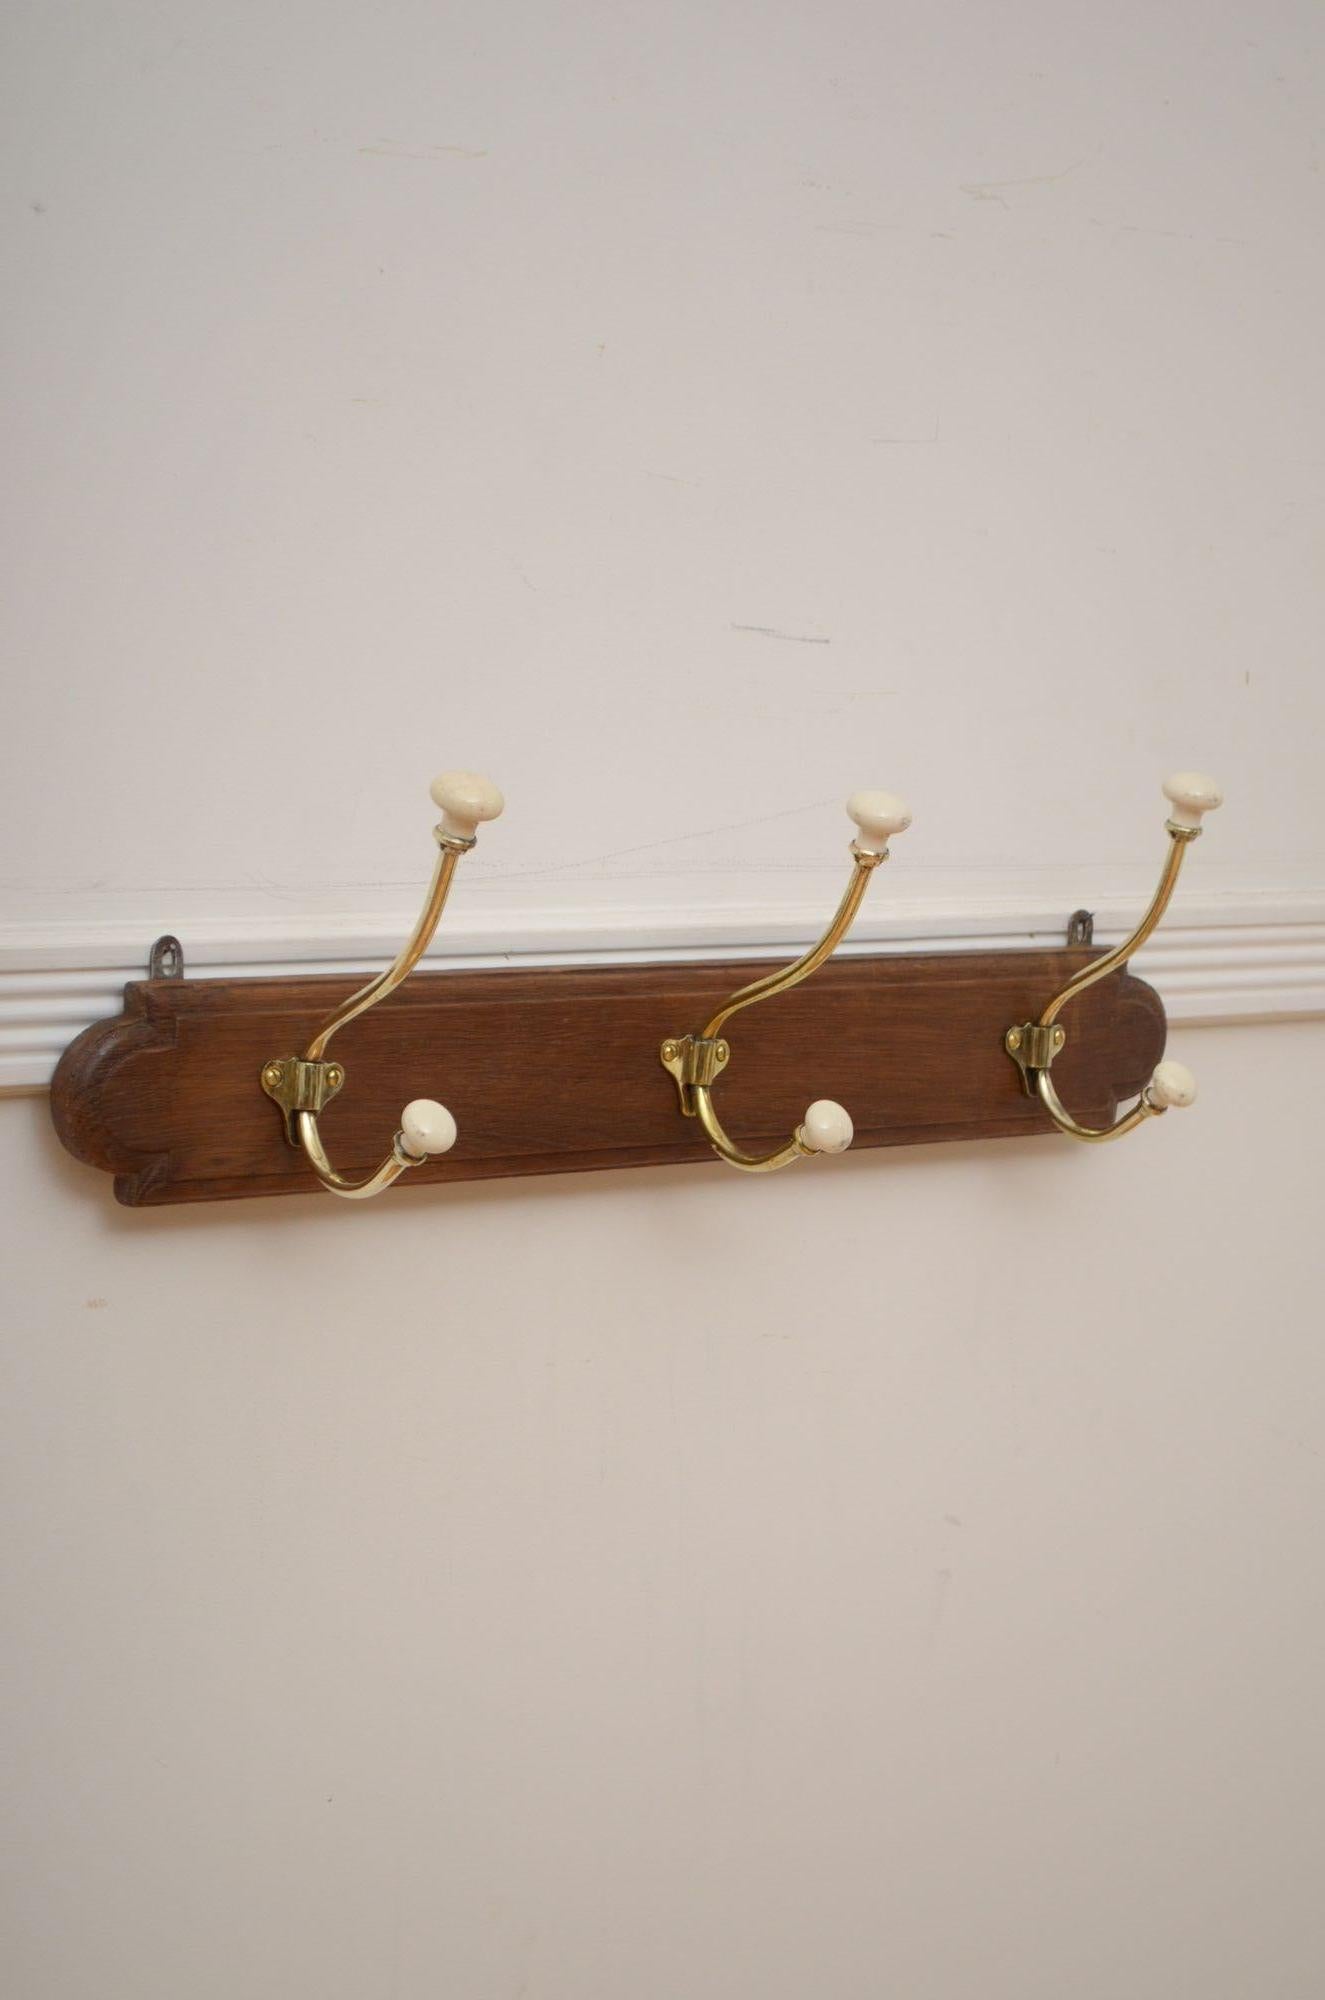 P0262  Stylish turn of the century English coat hooks, having three brass and ceramic hat and coat hooks on oak board. This antique coat rack is in home ready condition, fitted with 2 wall brackets. c1900 UK delivery included.
H8.5